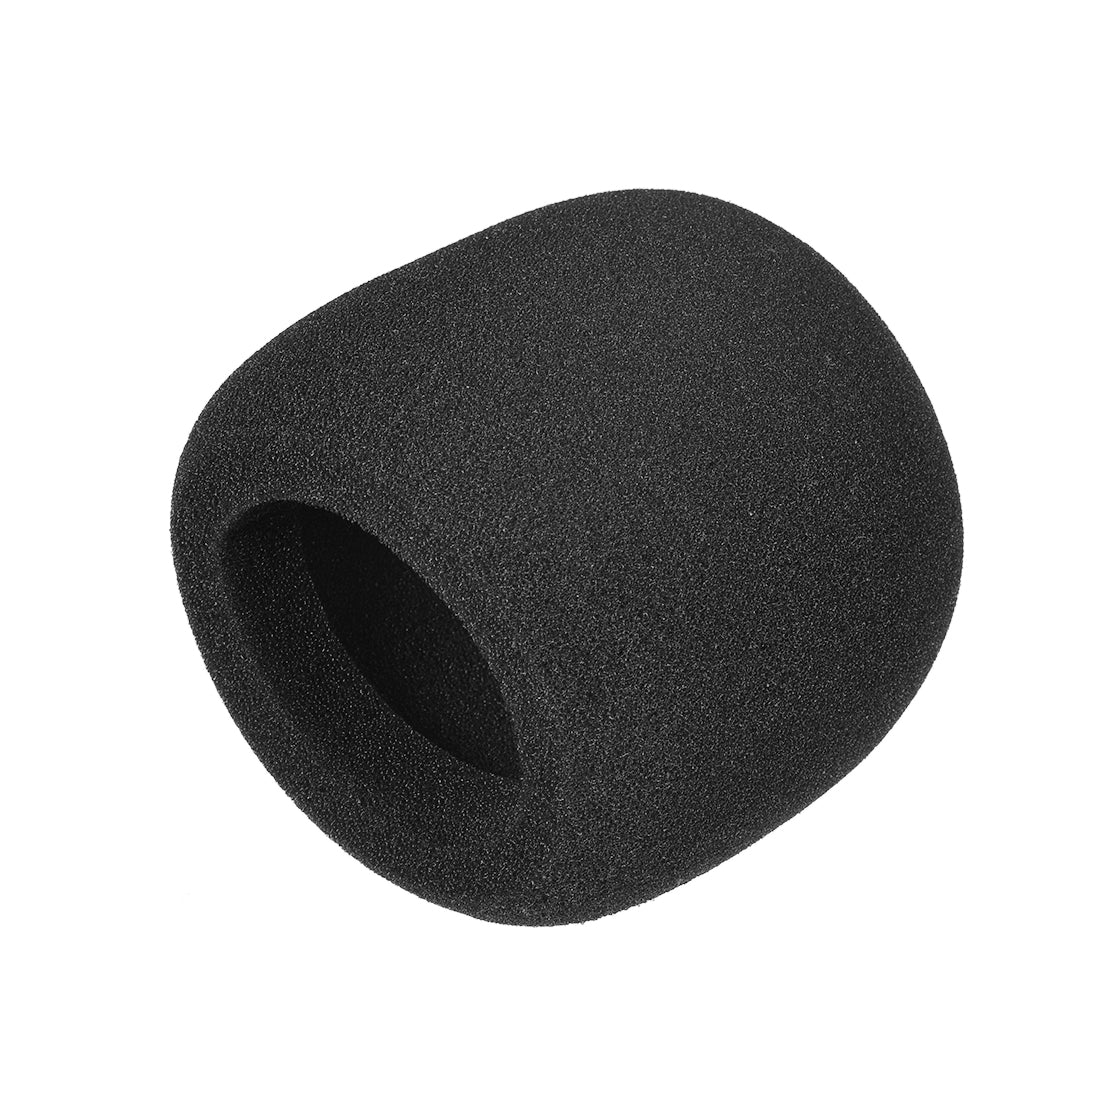 uxcell Uxcell Thicken Sponge Foam Mic Cover Handheld Microphone Windscreen Black for KTV